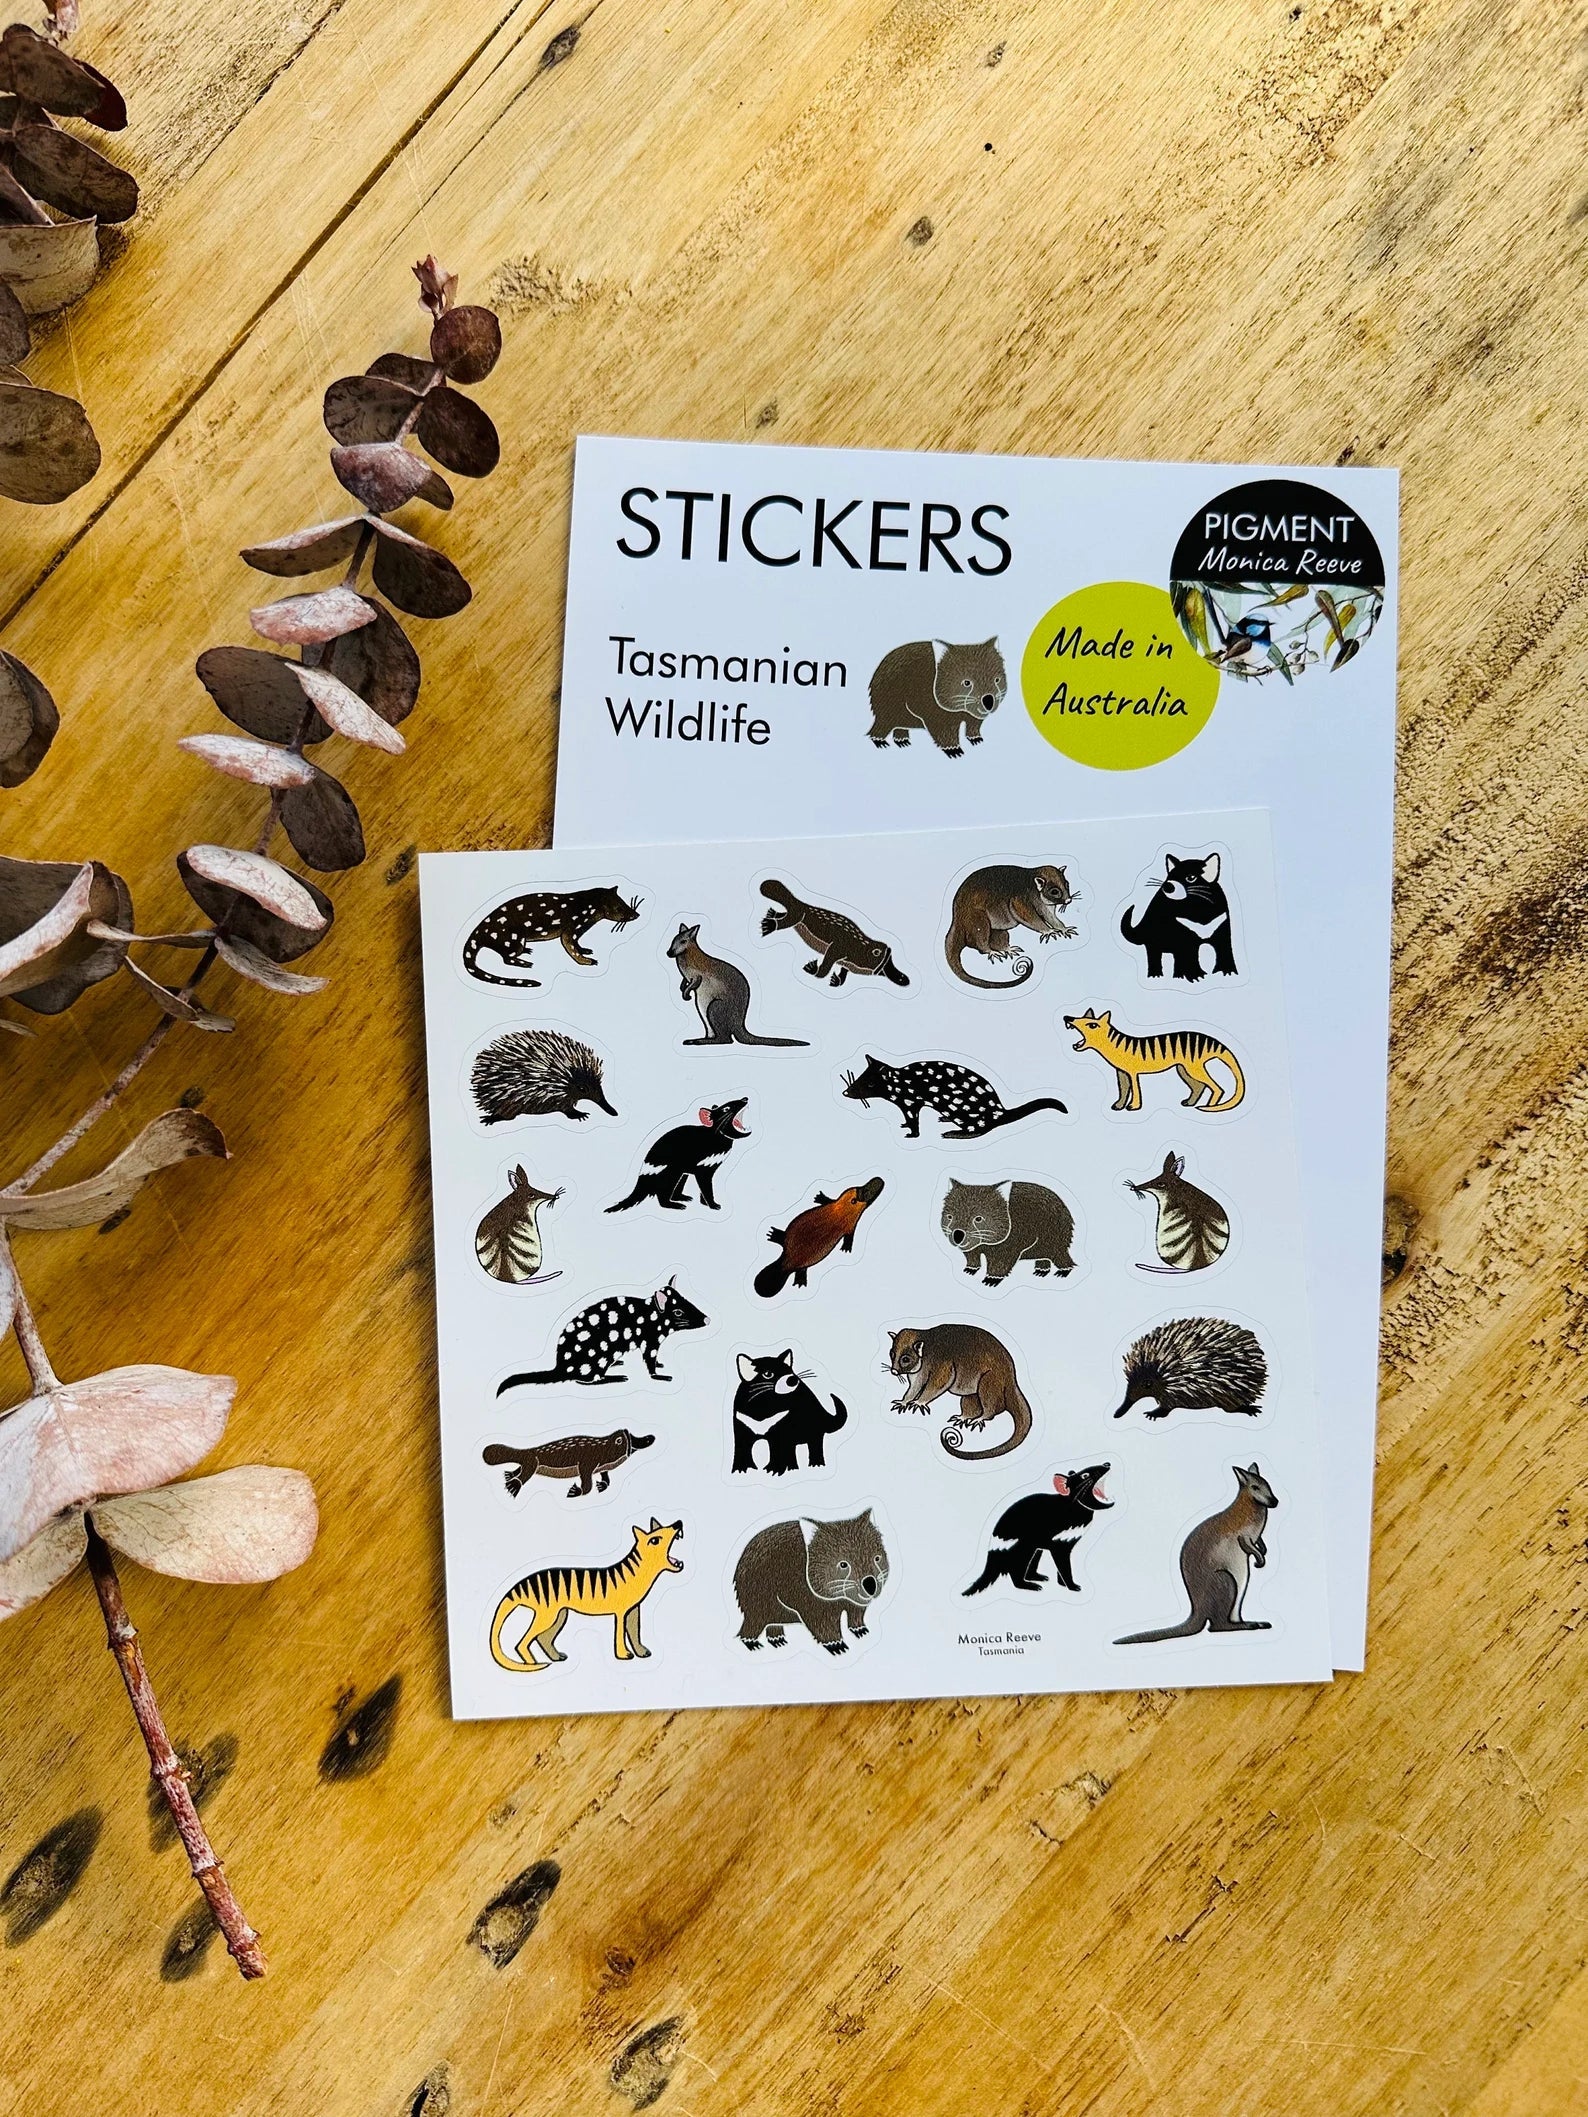 Stickers Sheets PIGMENT by Monica Reeve Decorative Stickers Monica Reeve Tasmanian Wildlife 